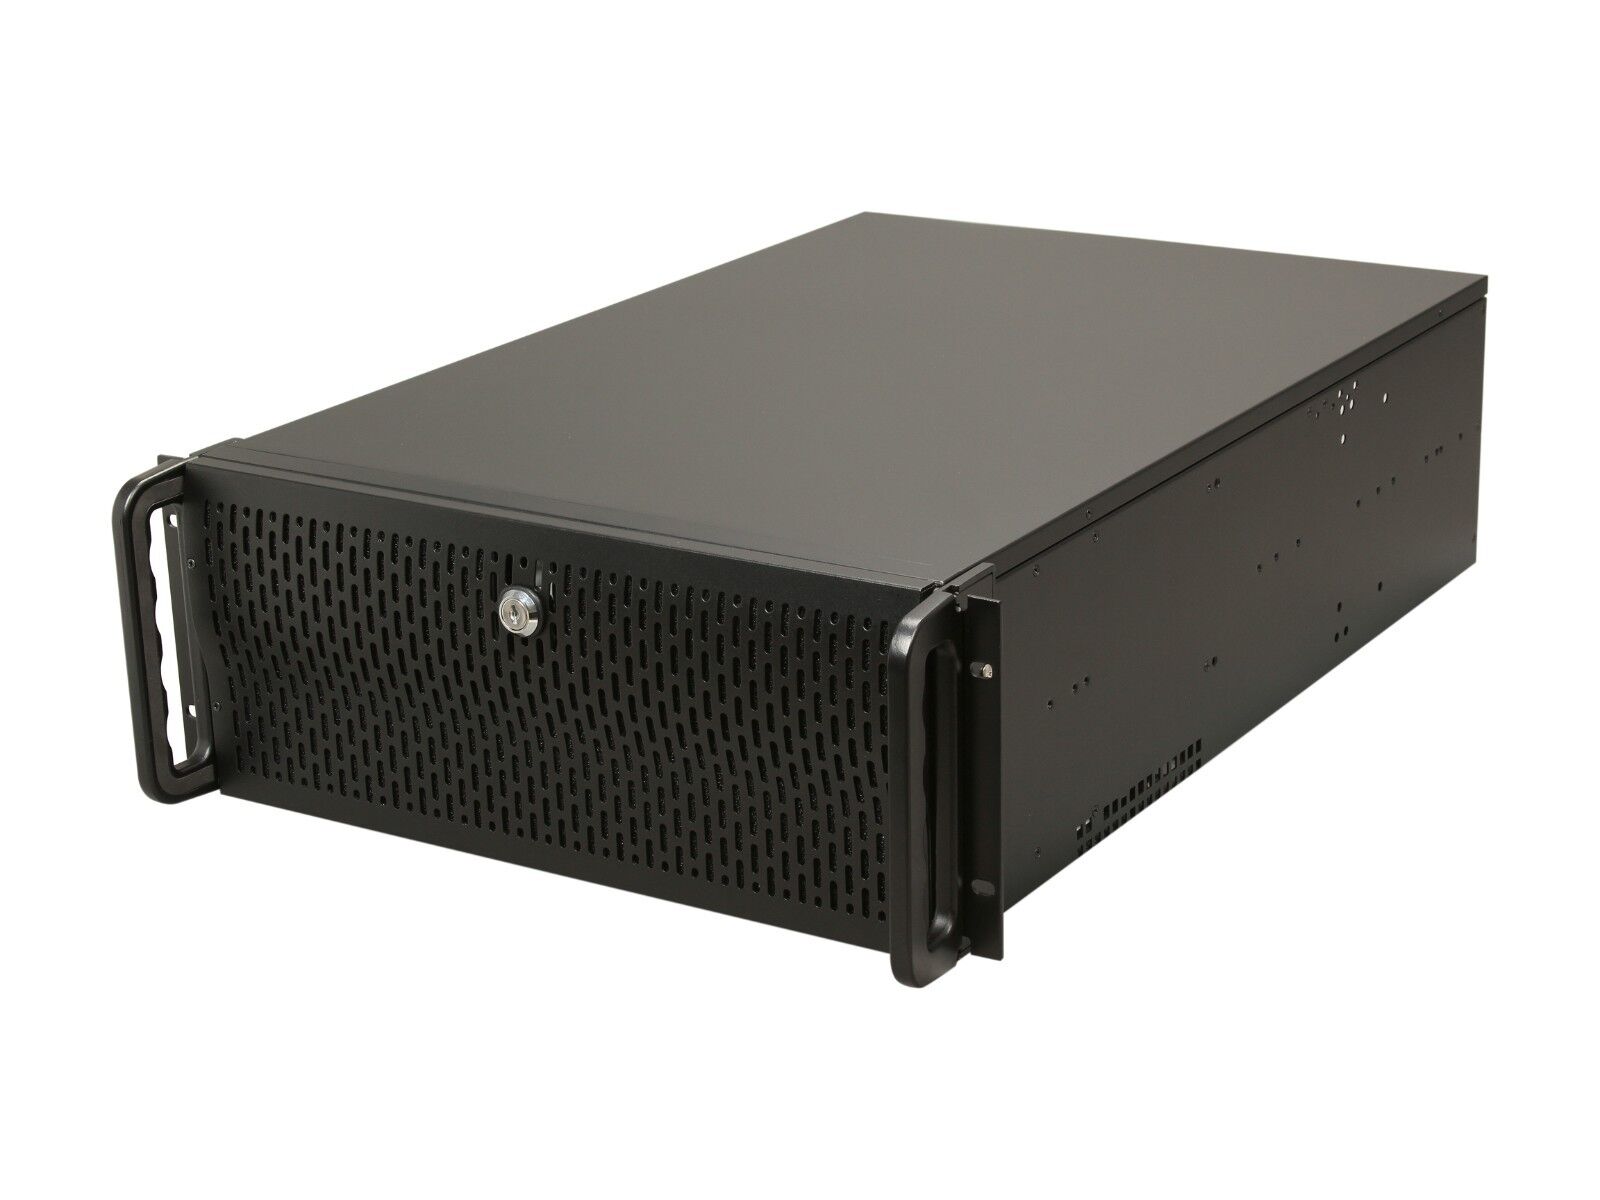 Rosewill 4U Rackmount Server Chassis with 15 Internal Bays and 8 Fans RSV-L4500